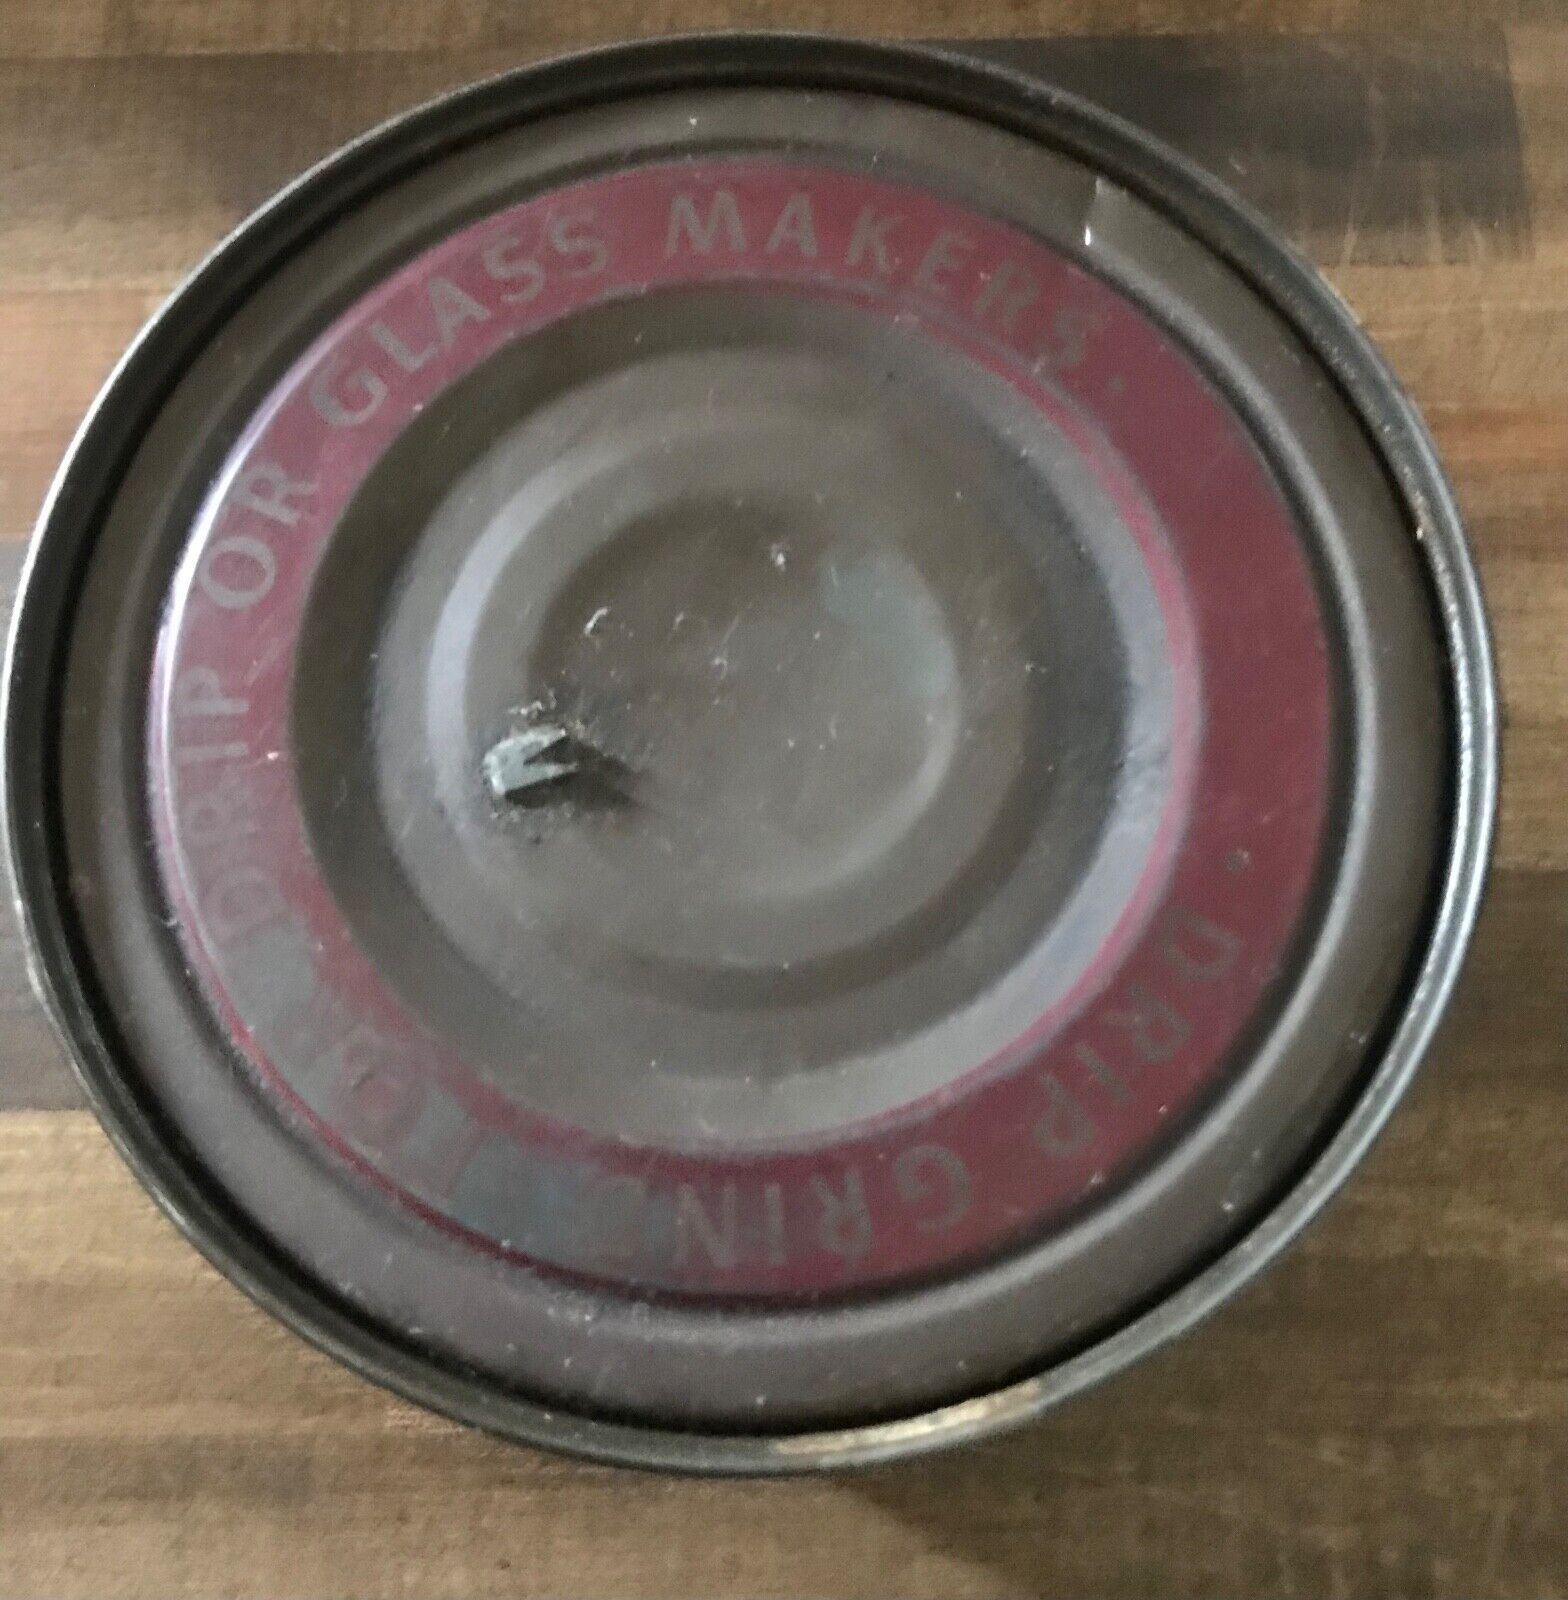 VINTAGE MJB DRIP GRIND COFFEE TIN 1 POUND ~FOR DRIP OR GLASS MAKERS